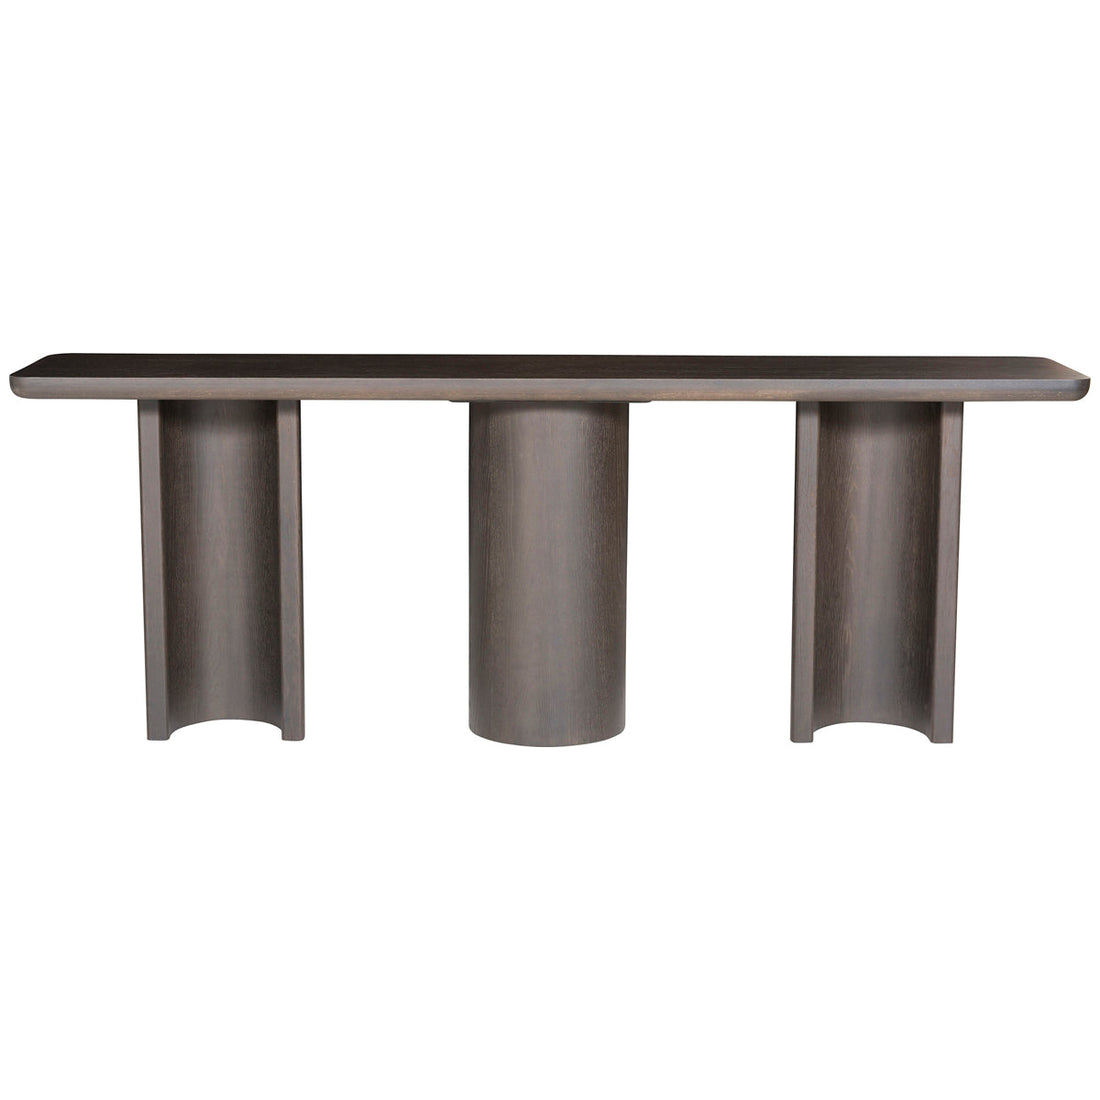 Vanguard Furniture Form Ink Console Table